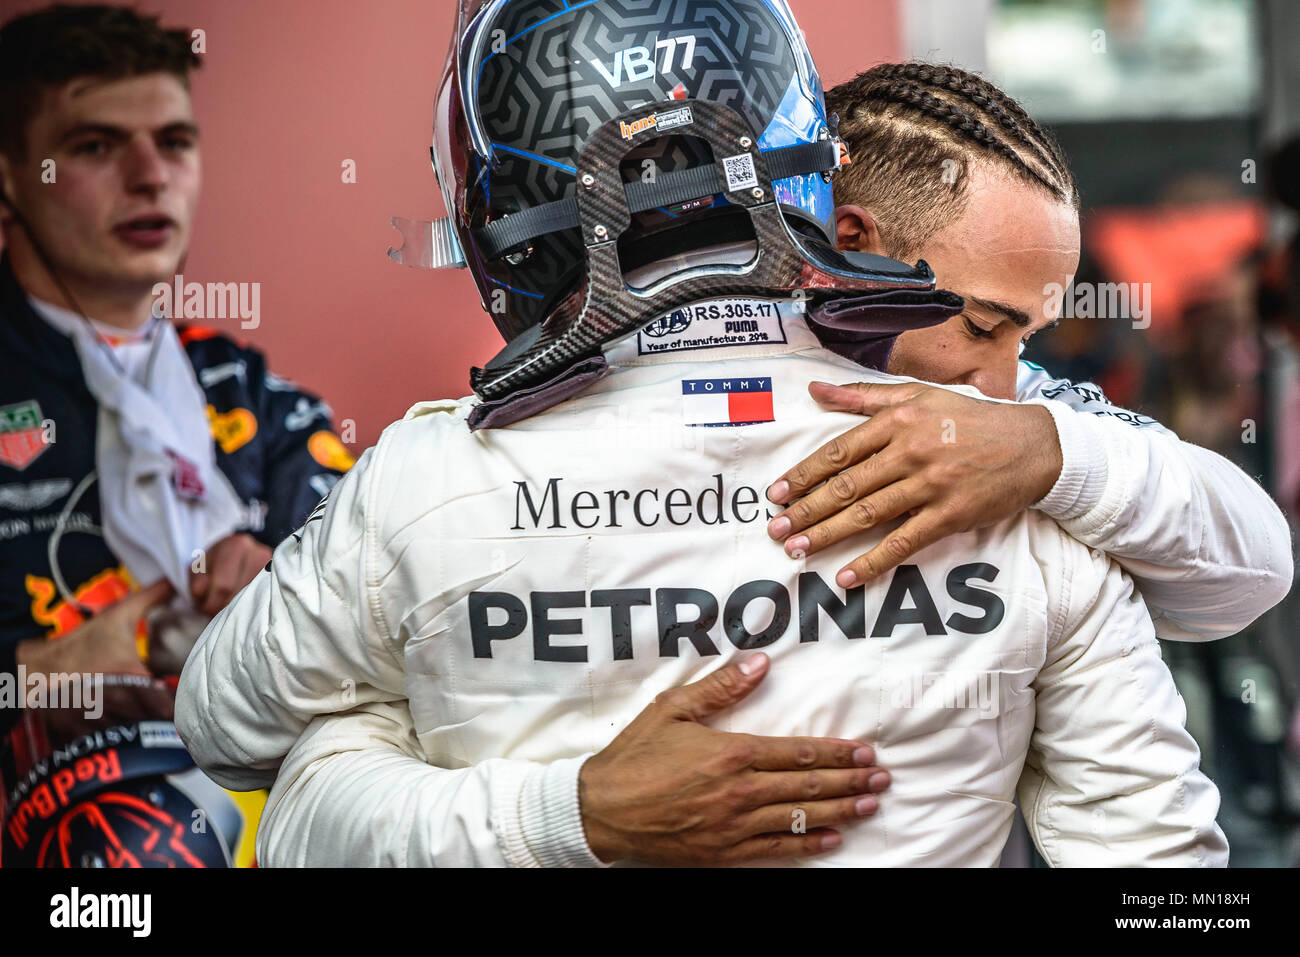 Barcelona, Spain. 13 May, 2018:  LEWIS HAMILTON (GBR) is congratulated by Mercedes team mate VALTTERI BOTTAS (FIN)  after winning the Spanish GP at Circuit de Barcelona - Catalunya Credit: Matthias Oesterle/Alamy Live News Stock Photo